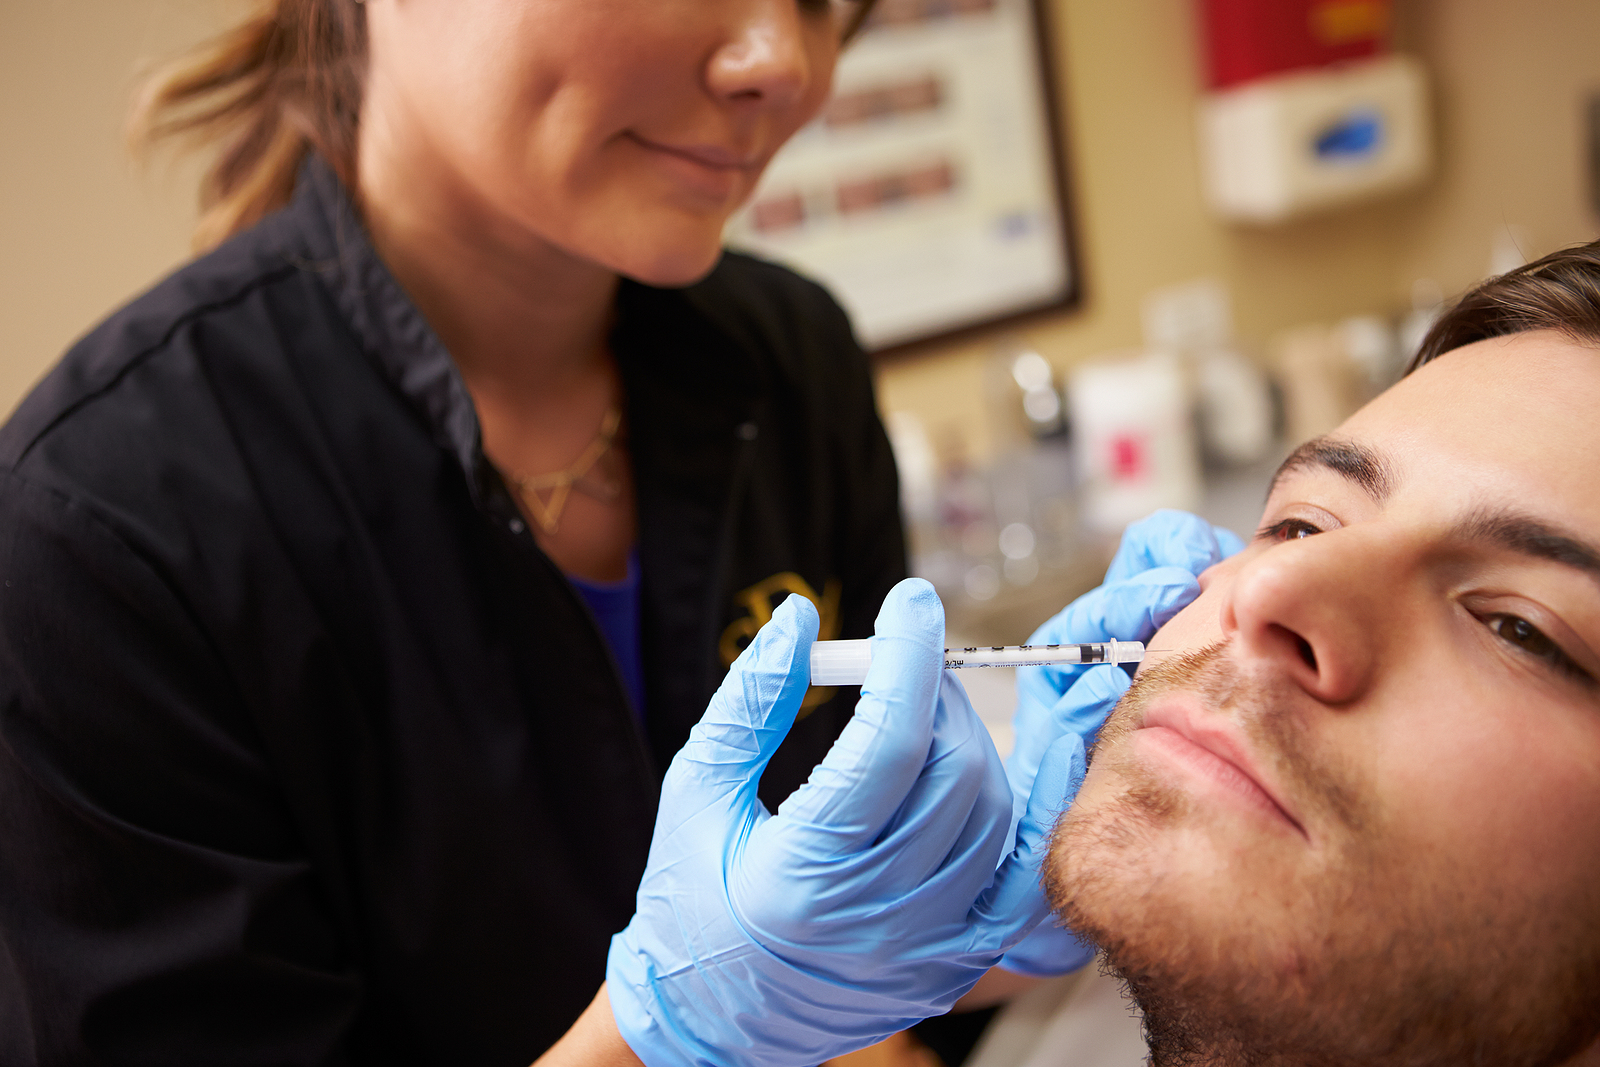 A doctor smiles as she injects a young man with botox underneath his eyes. The young man has a serious expression.